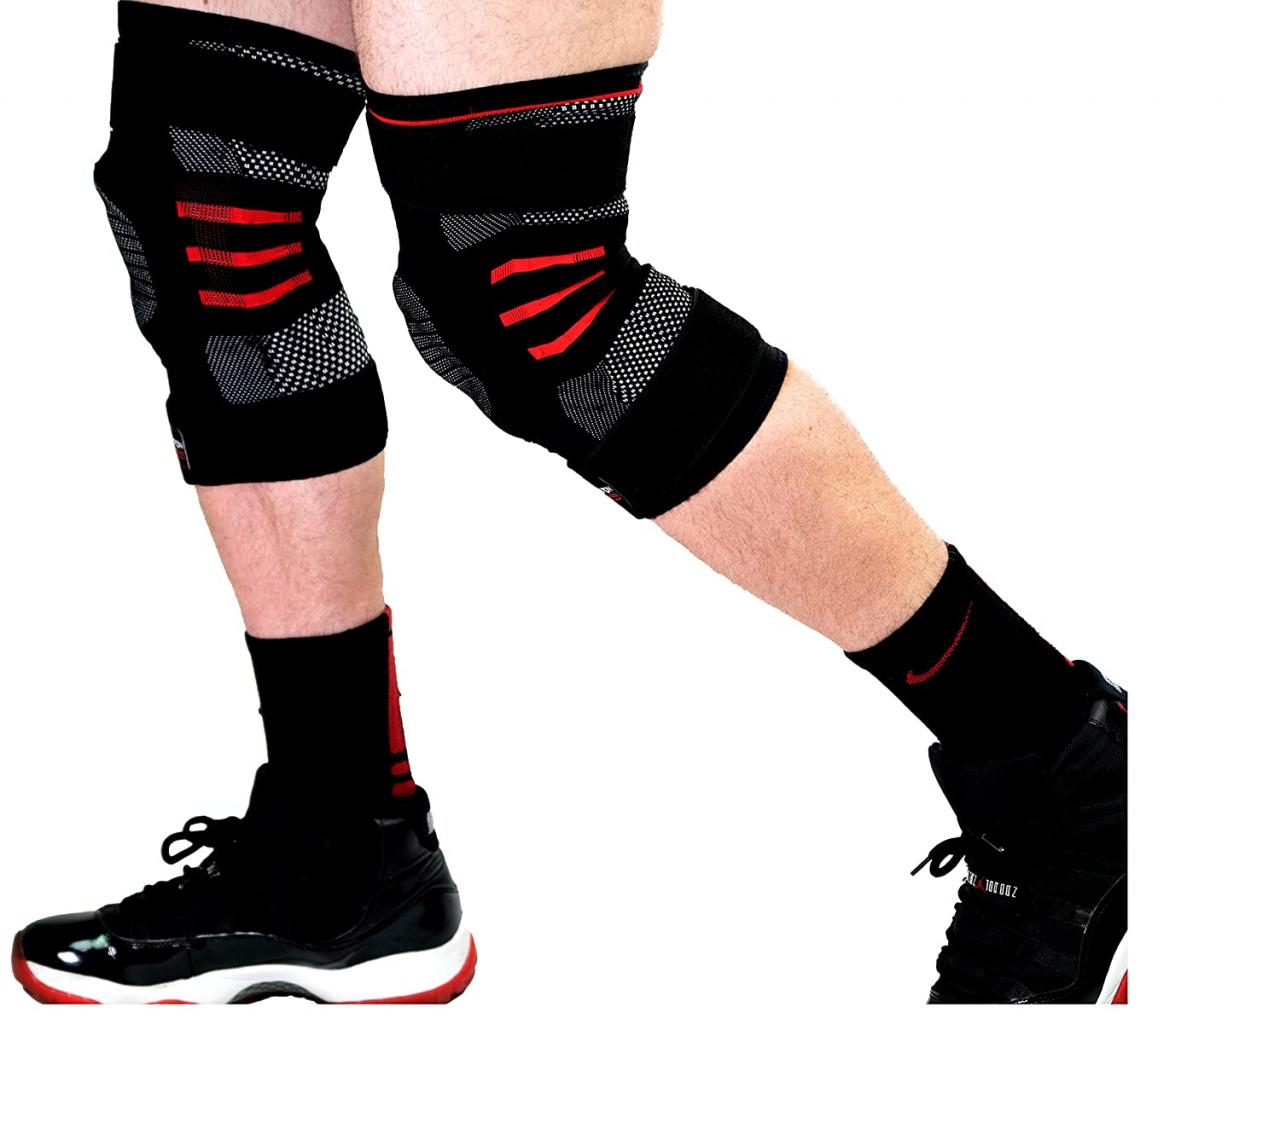 Accessories to Help Perfect Your Squats - Dark Iron Fitness Knee Sleeves